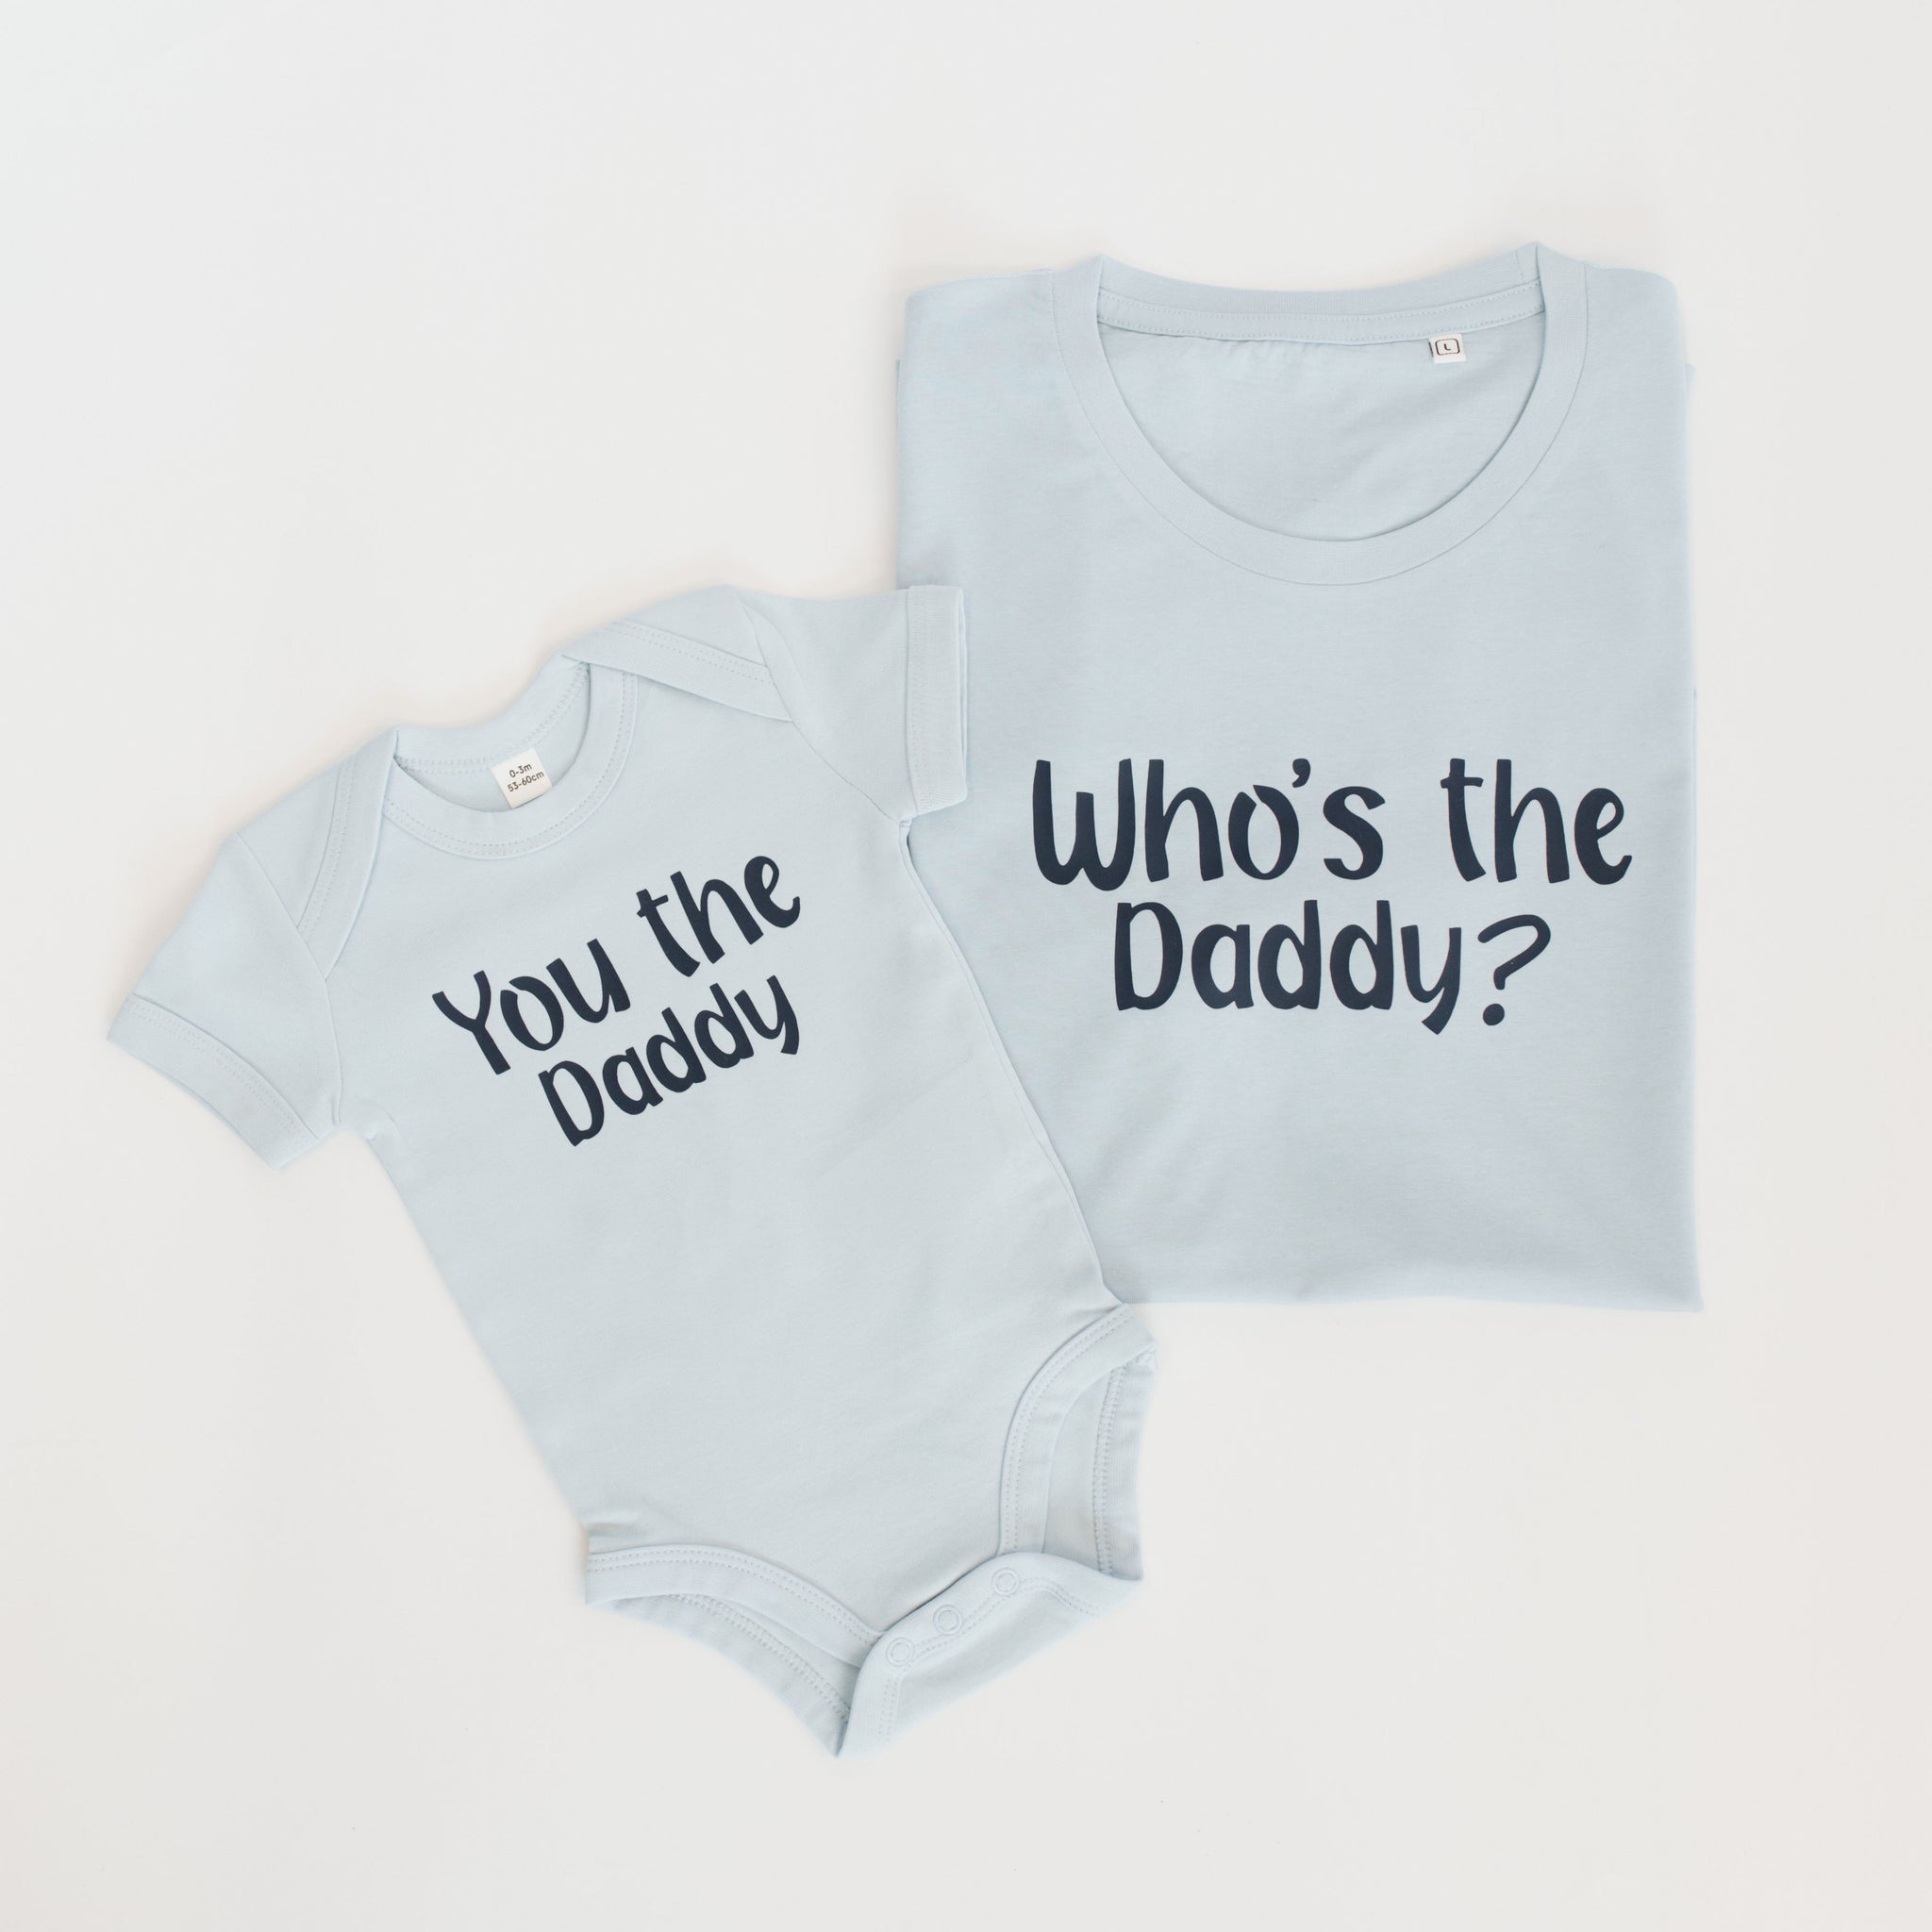 Who's the Daddy? T-shirt